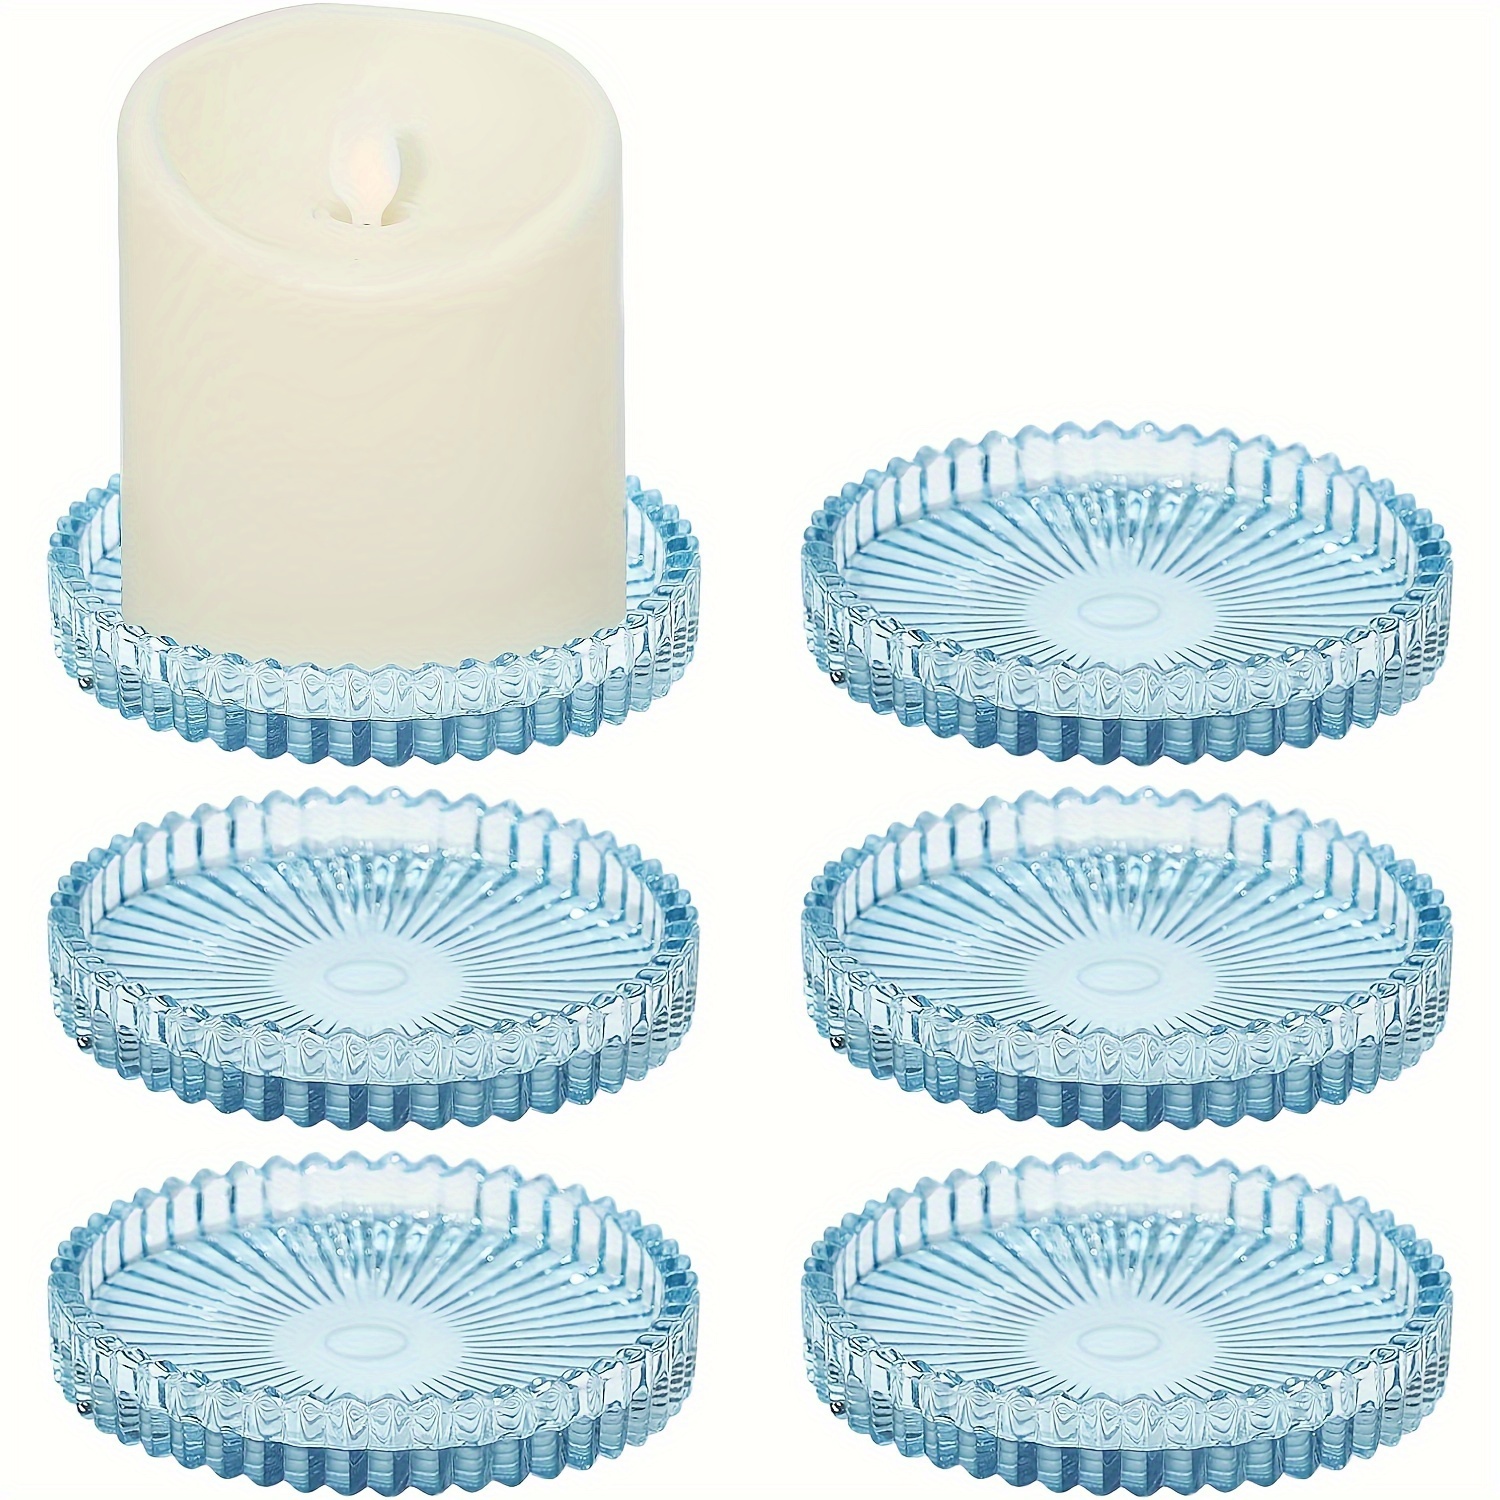 

Set Of 6 Glass Pillar Candle Holder 4 Inch Candle Holders For Pillar Candles, Candle Holder Plate Candle Stand For Table Centerpiece, Wedding, Party, Home Decor Blue